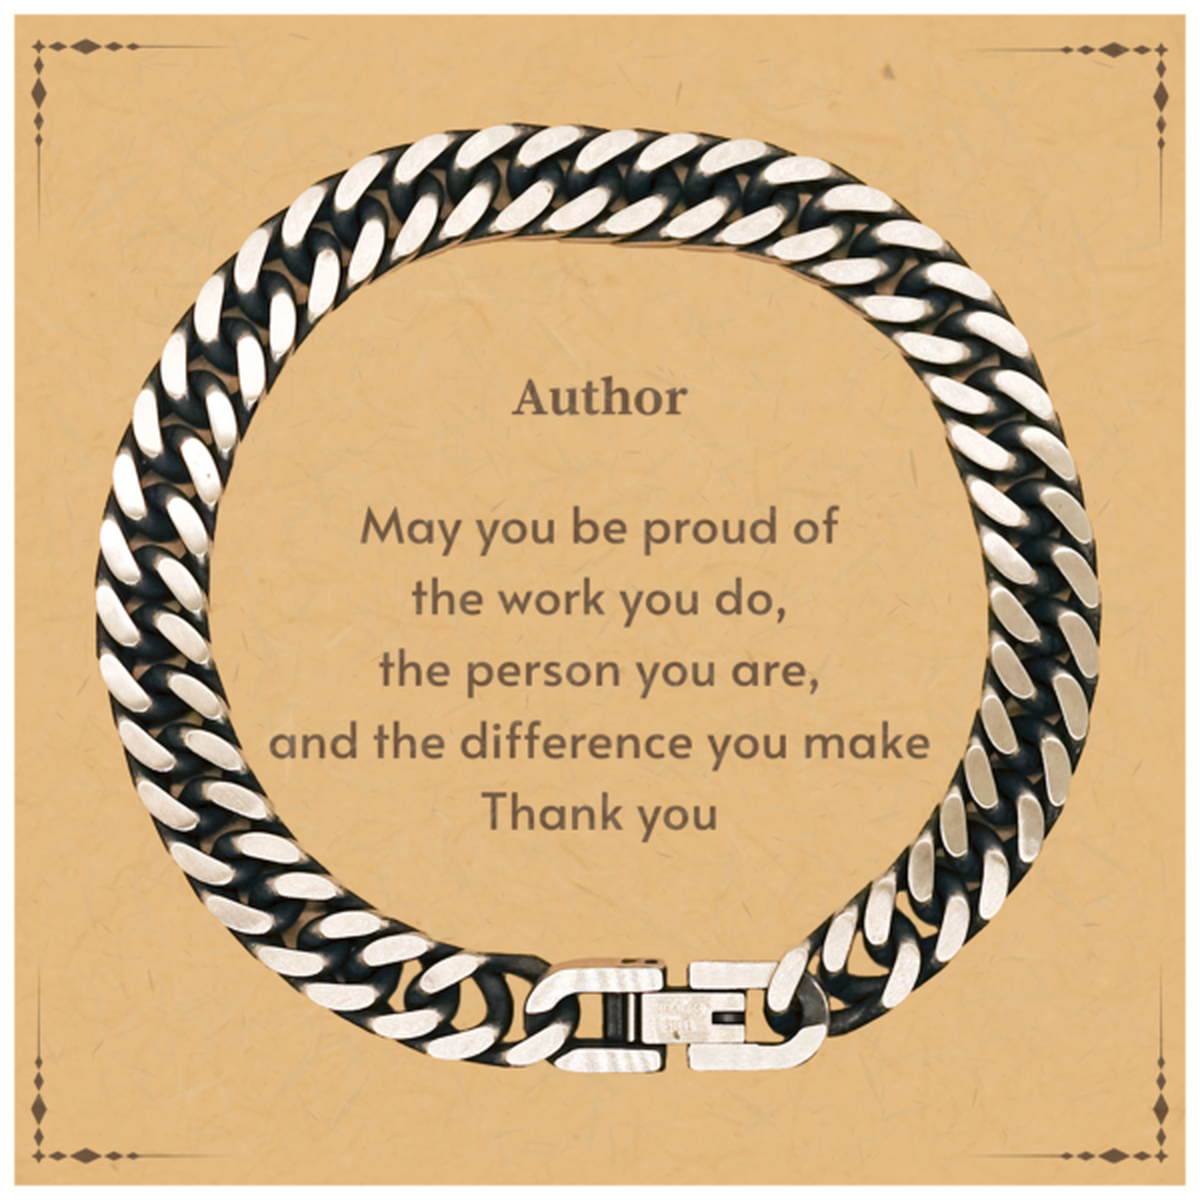 Heartwarming Cuban Link Chain Bracelet Retirement Coworkers Gifts for Author, Author May You be proud of the work you do, the person you are Gifts for Boss Men Women Friends